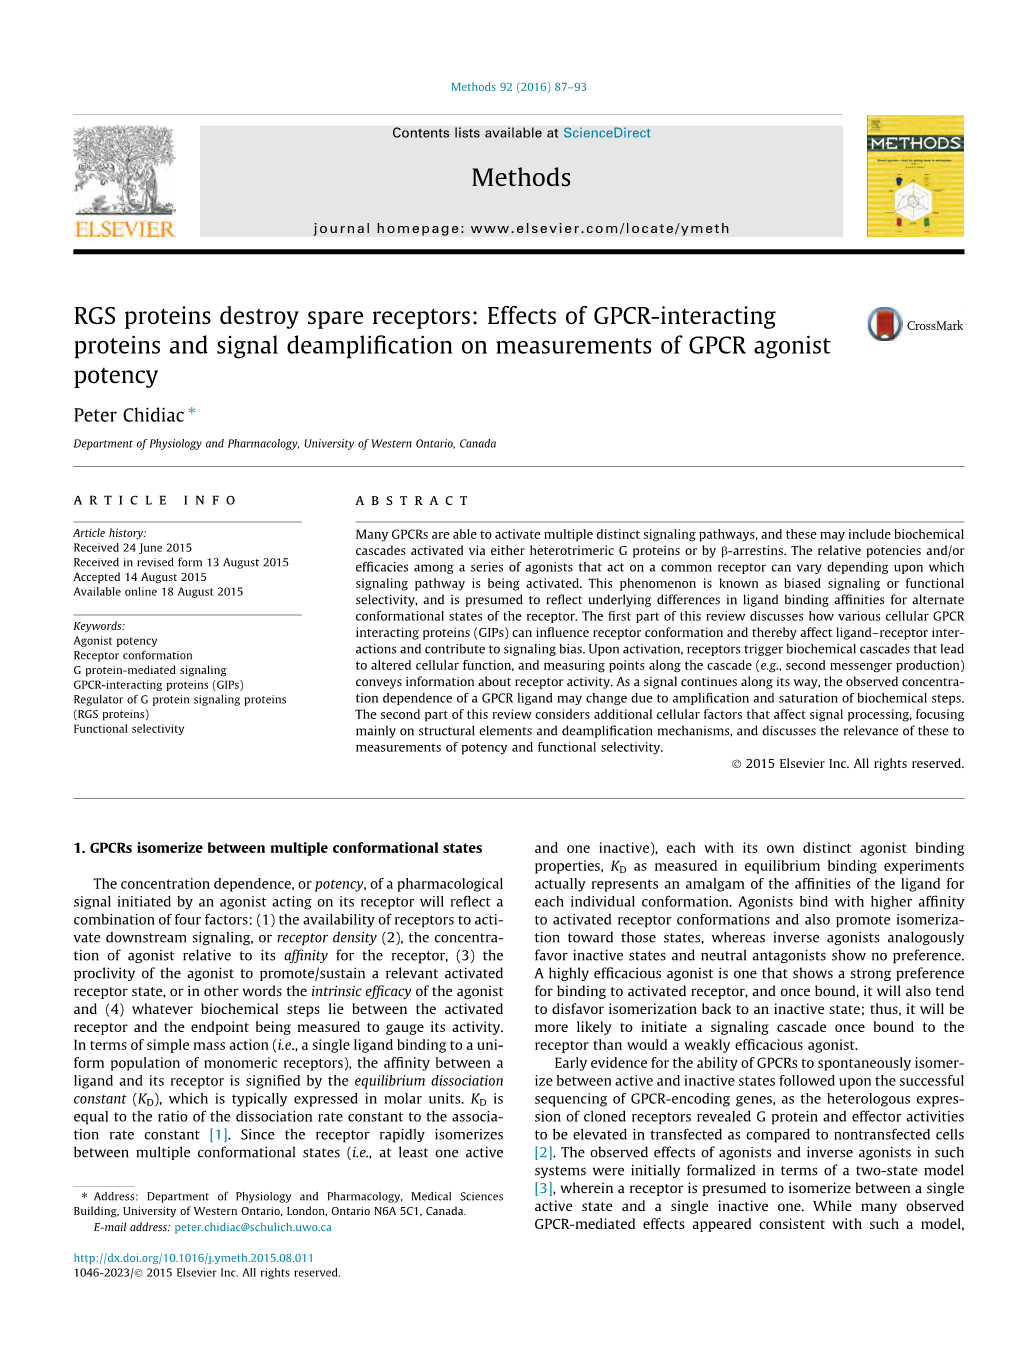 RGS Proteins Destroy Spare Receptors: Effects of GPCR-Interacting Proteins and Signal Deamplification on Measurements of GPCR Ag